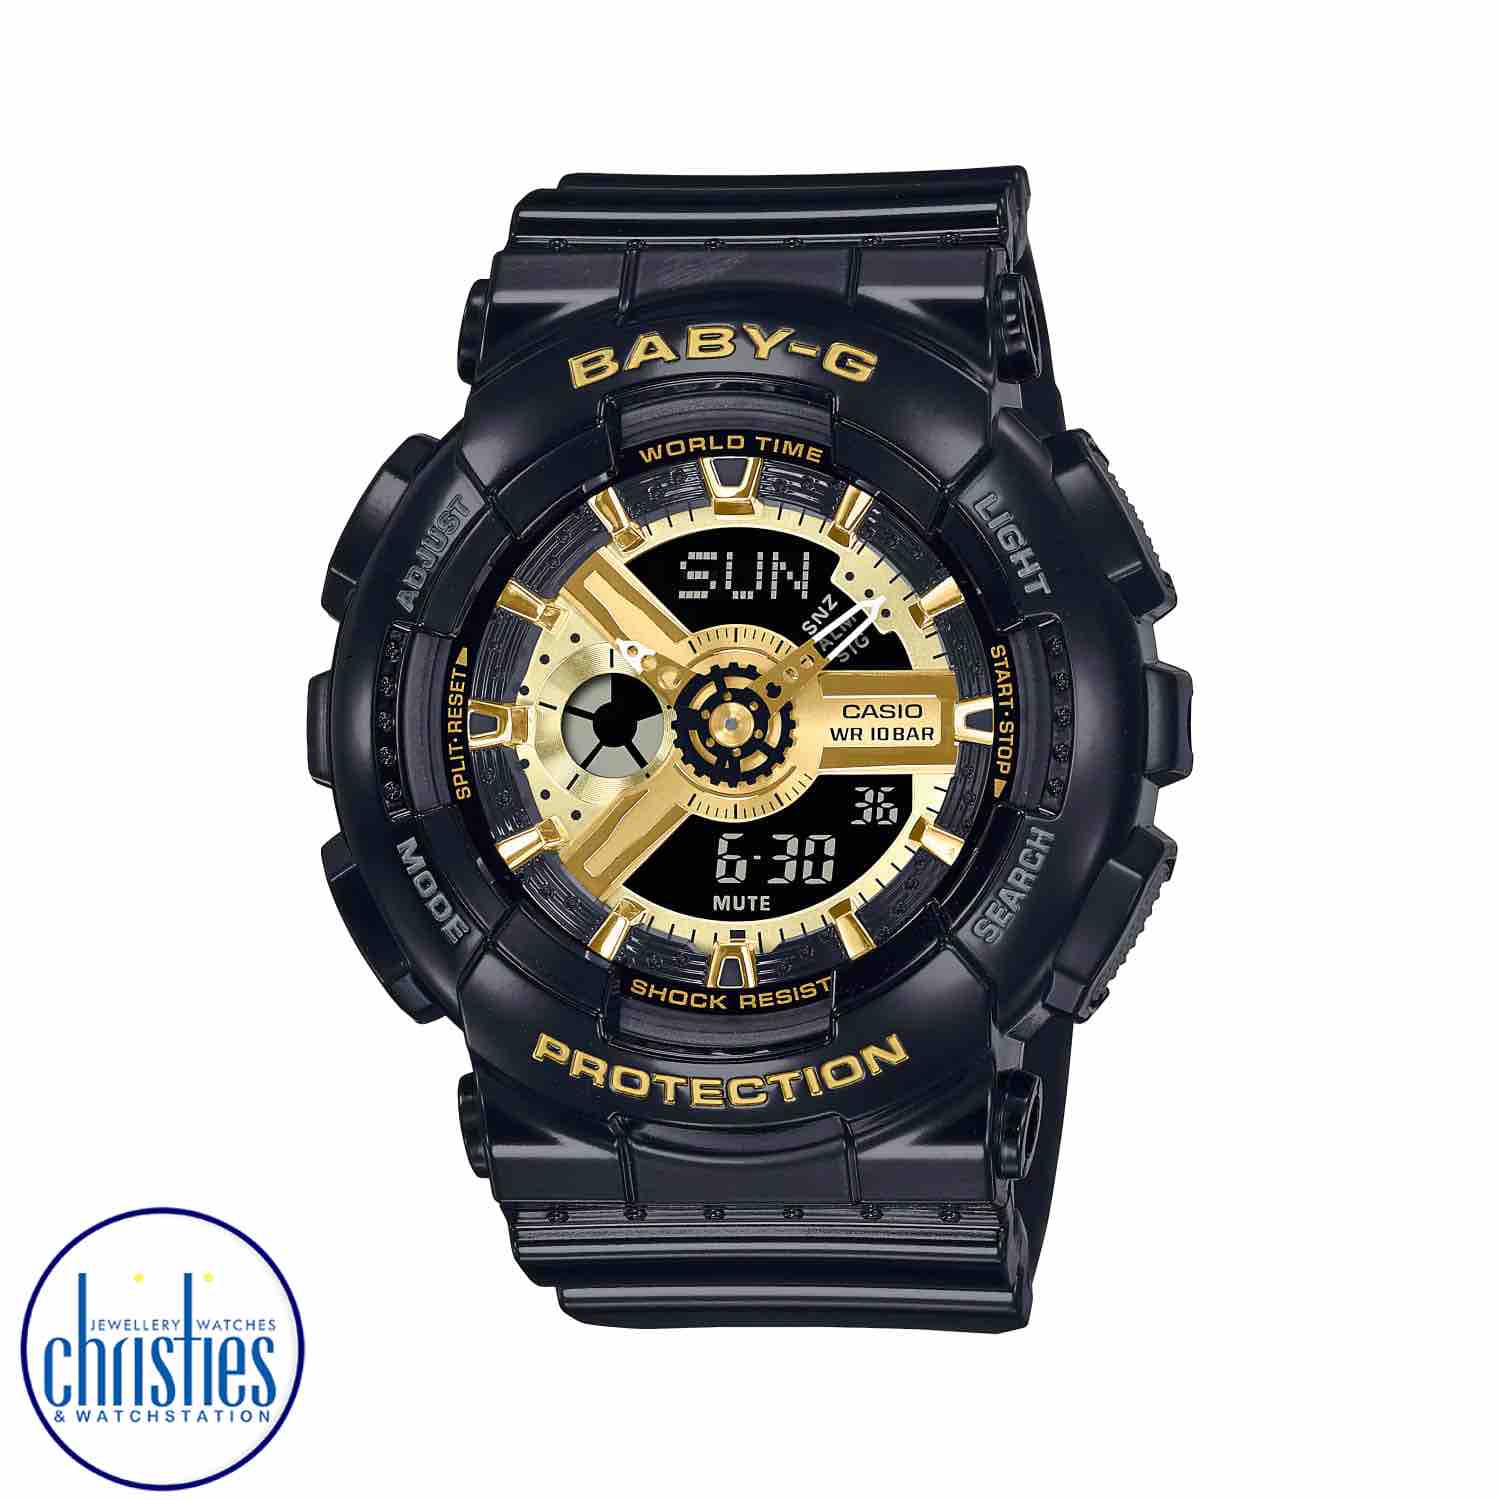 BA110X-1A Casio BABY-G Ana-Digi Watch. Slip on a splash of clean, fresh colour with an eye-catcher inspired by the popular design of the G-SHOCK GA-110. Baby-G watches price